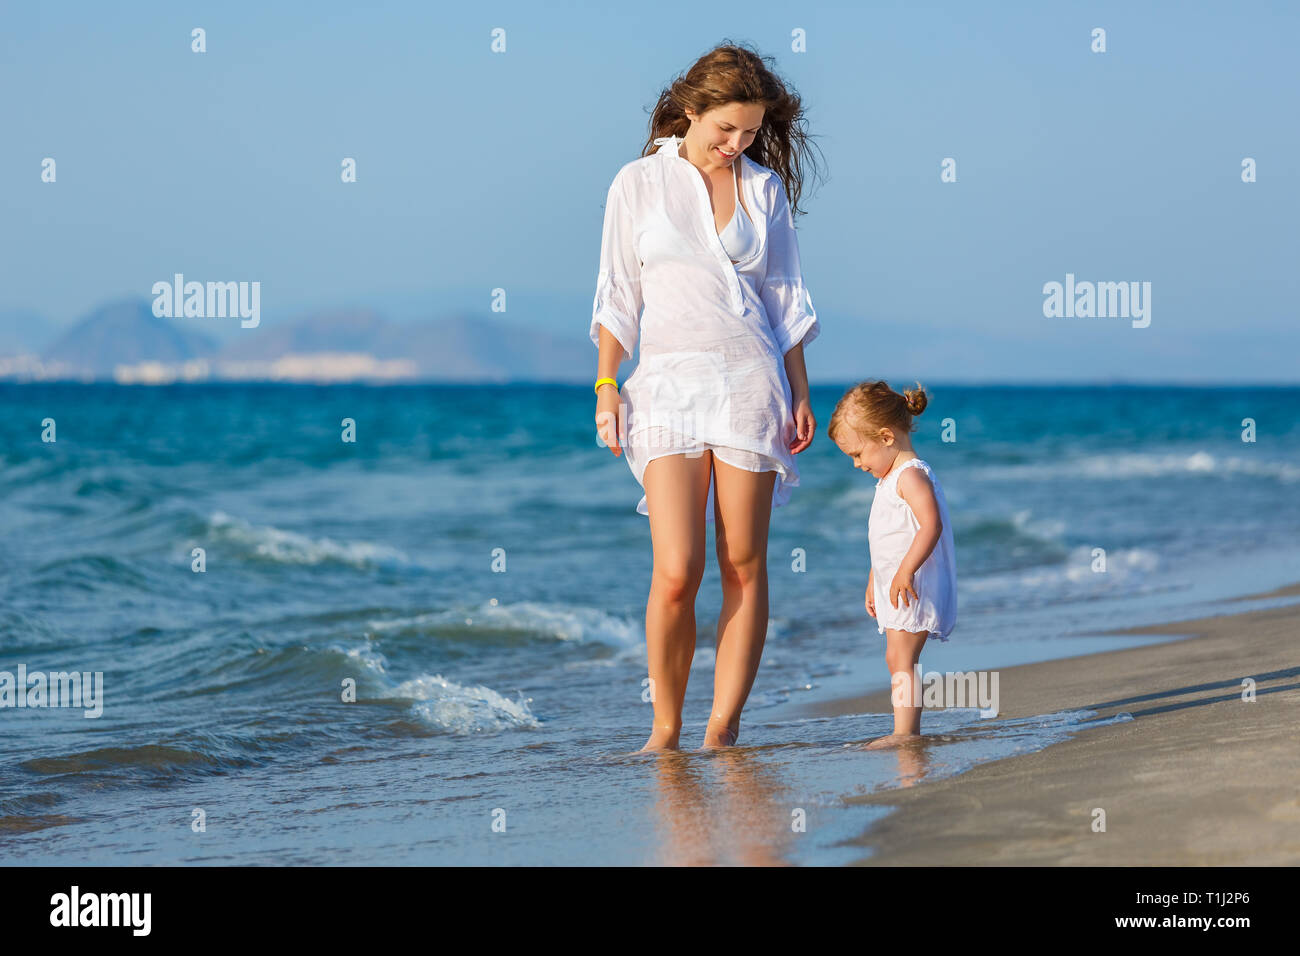 Mother and daughter walking on the beach Stock Photo